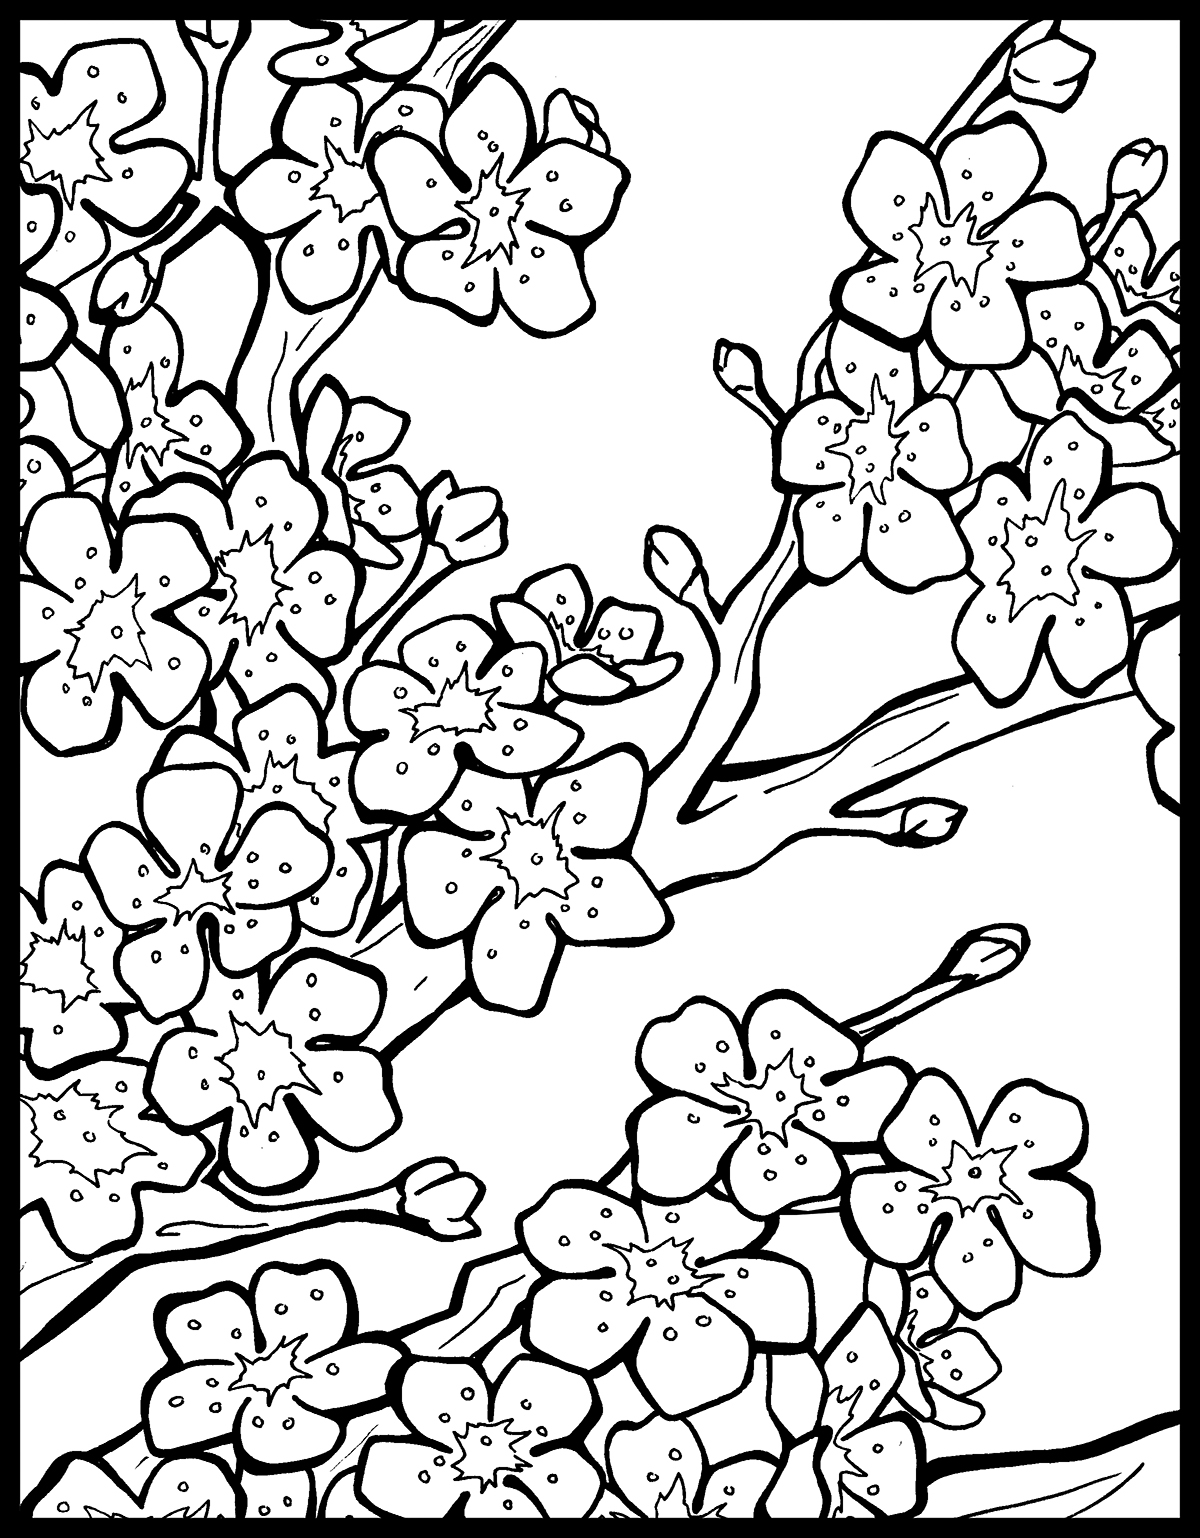 Download Chinese Lantern Festival Coloring Book - MOBOT on Behance